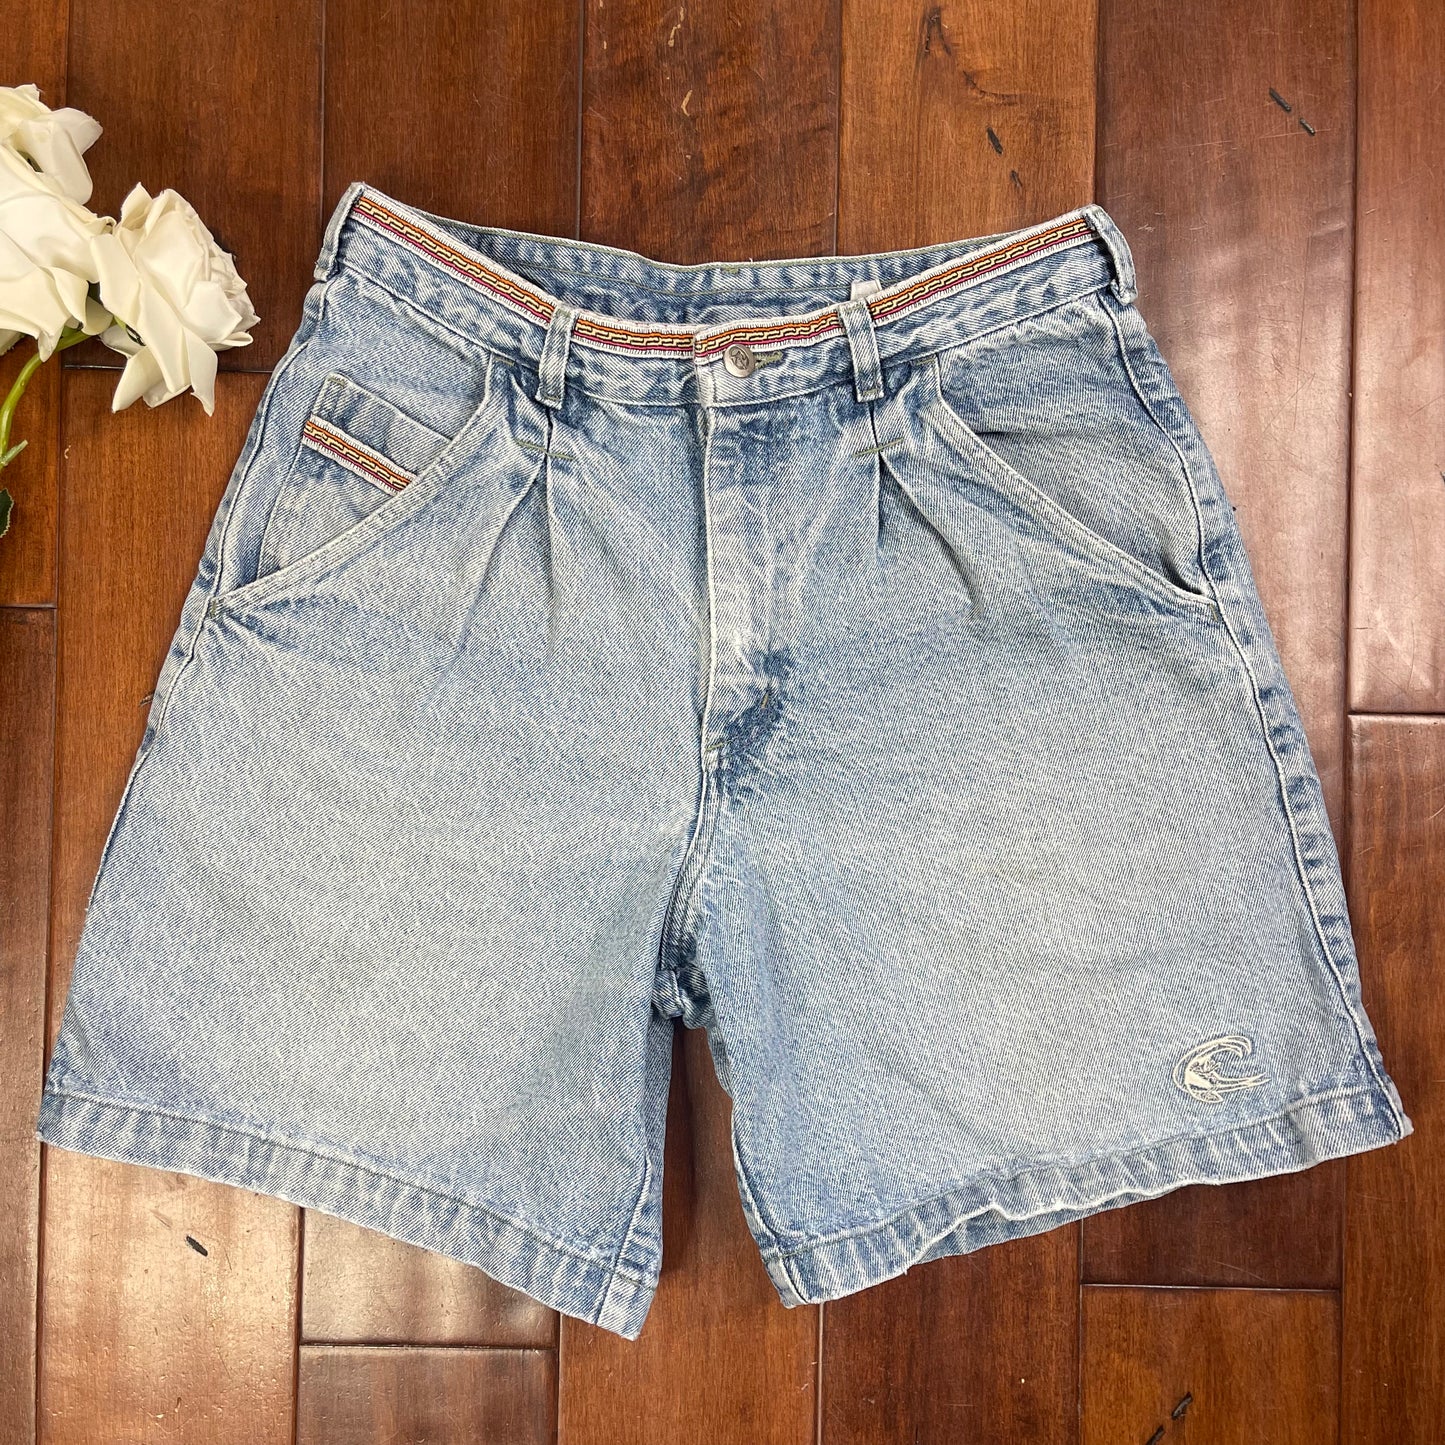 VINTAGE EMBROIDERED HIGH-WAISTED JEAN SHORTS